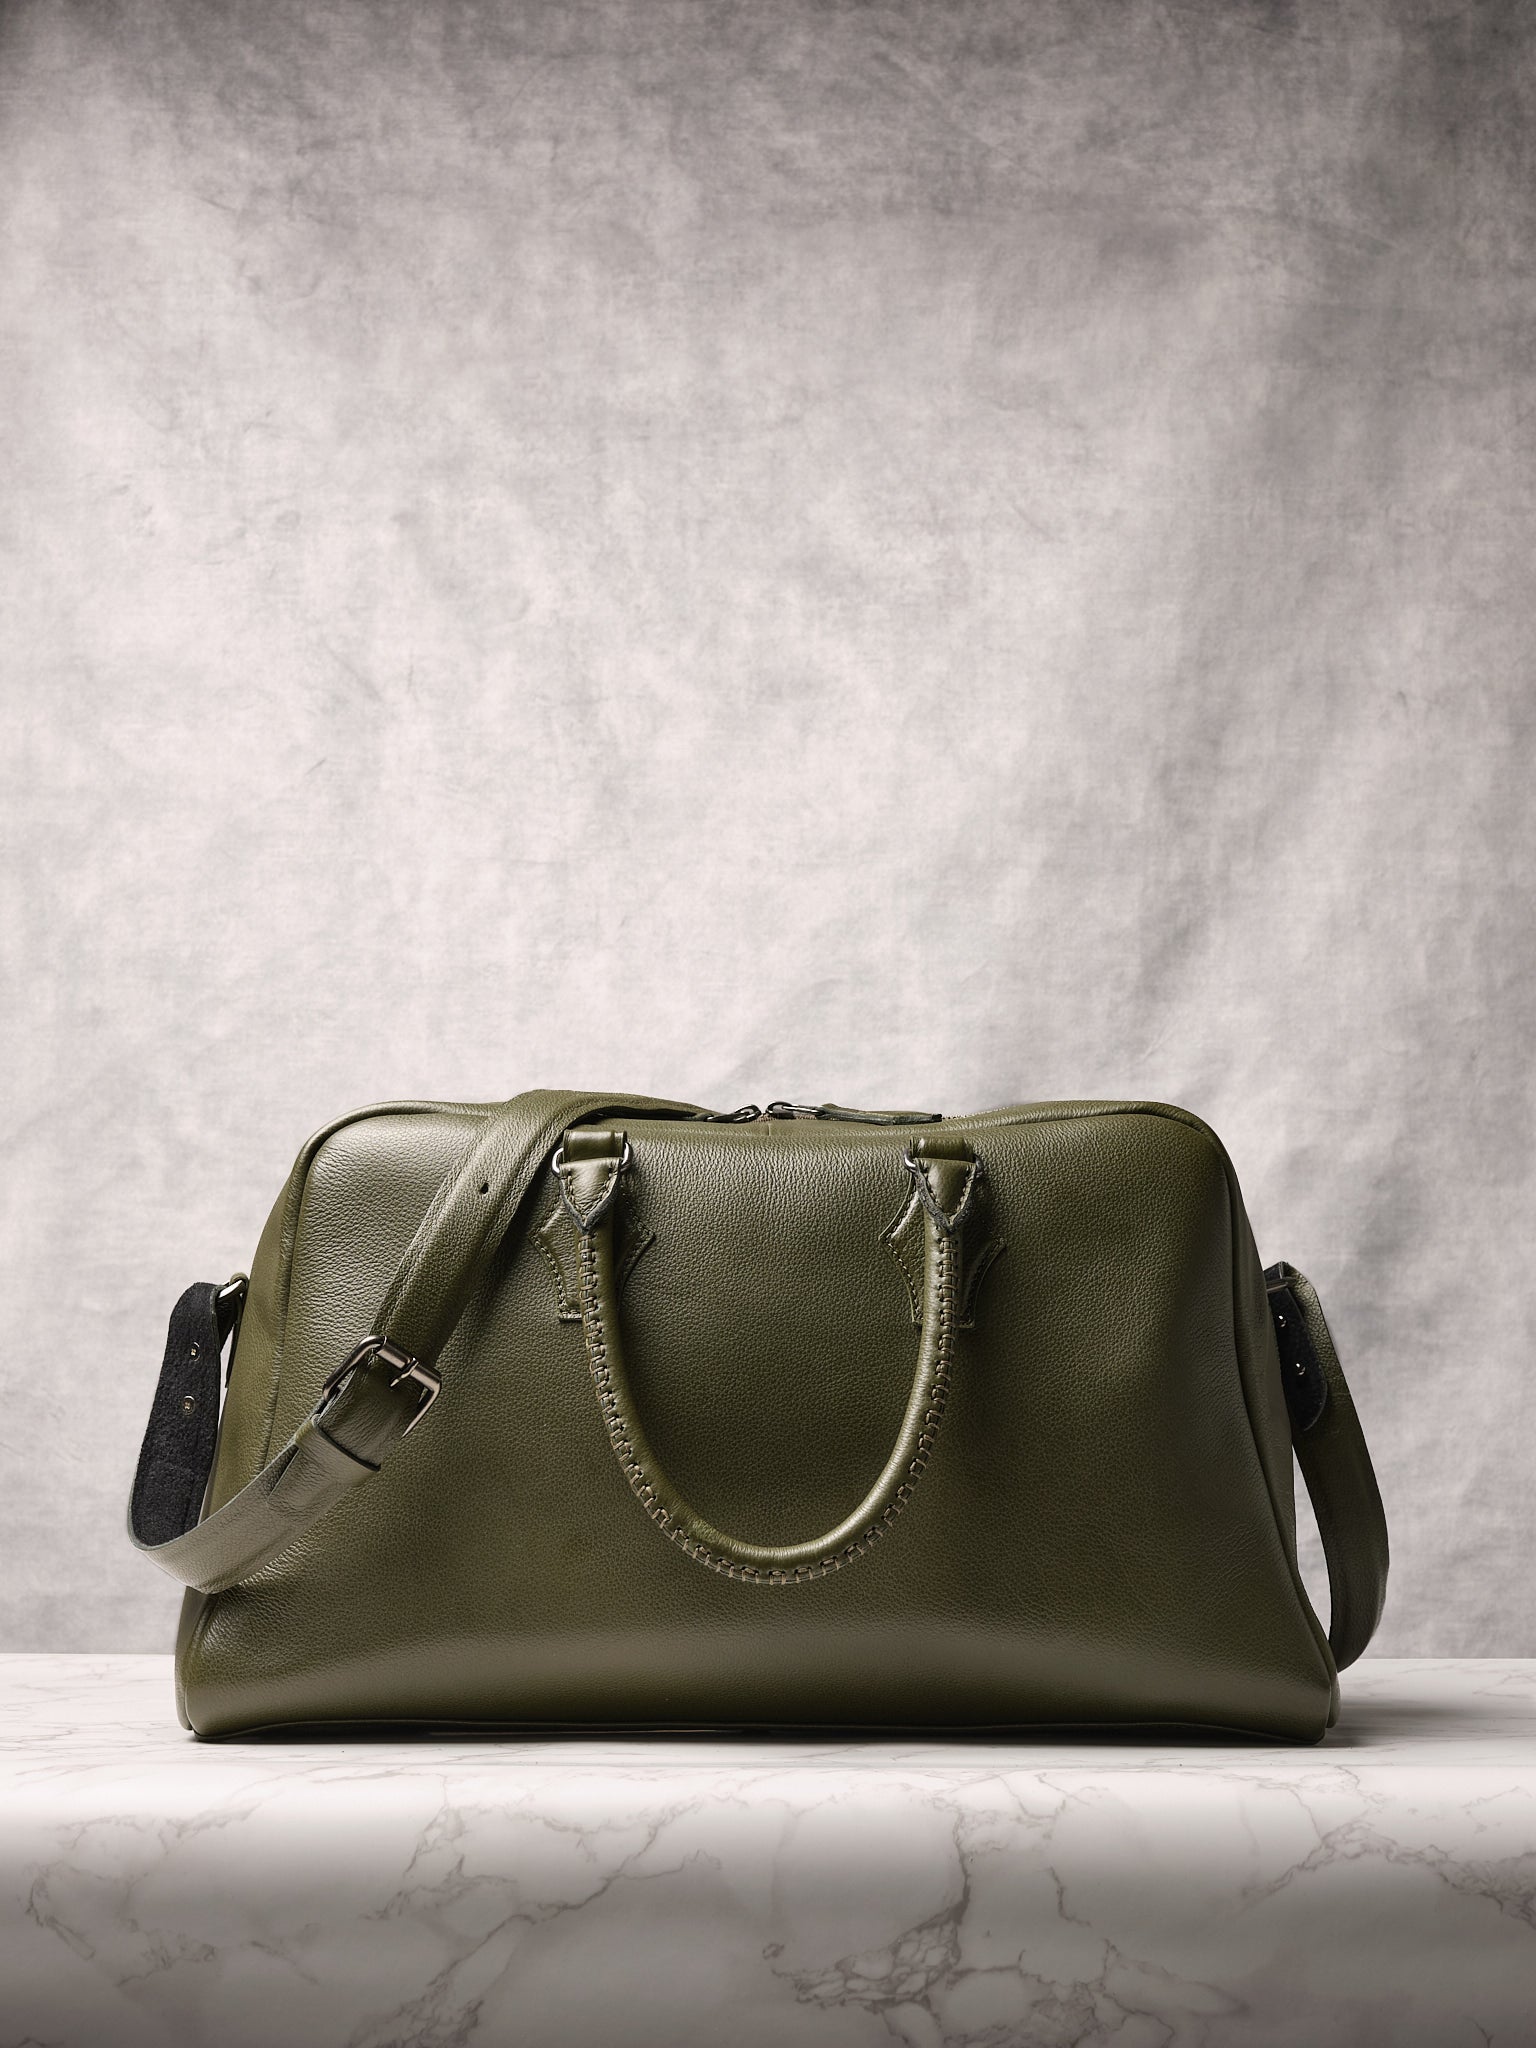 Removable Shoulder Strap. Large Travel Duffle Bag Green by Capra Leather